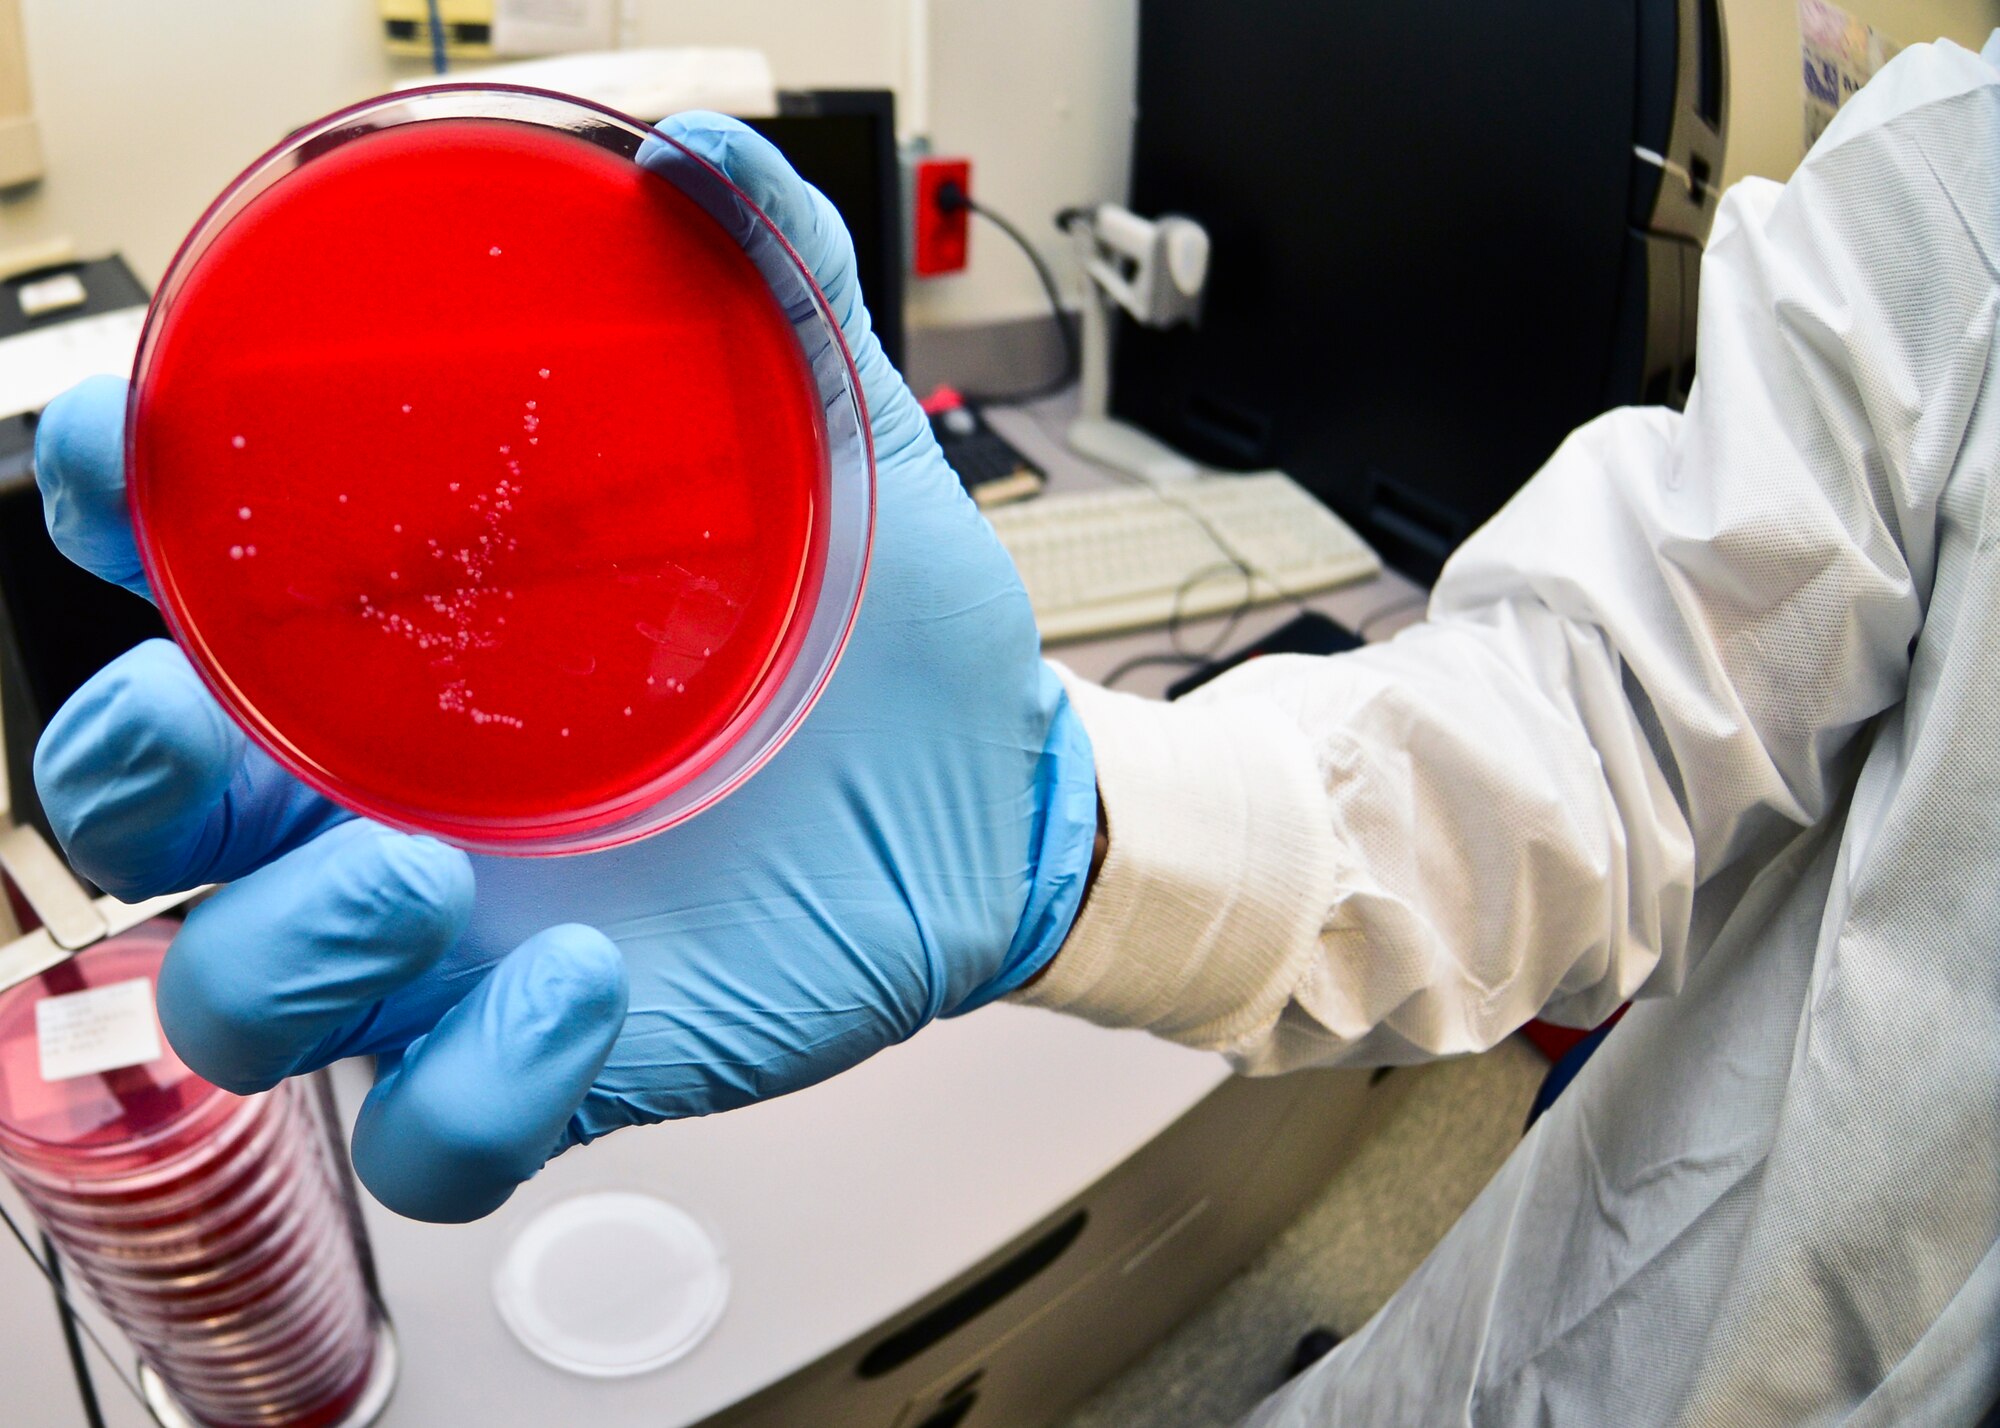 An Air Force laboratory technician holds up a blood culture sample that was placed in a controlled environment in the laboratory at Osan Air Base, Republic of Korea, Oct. 22, 2015. The heated, controlled environment allows bacteria in the culture to react and grow more quickly, which speeds up the time it takes lab technicians to determine the bacterial strain. (U.S. Air Force photo/Tech. Sgt. Travis Edwards)